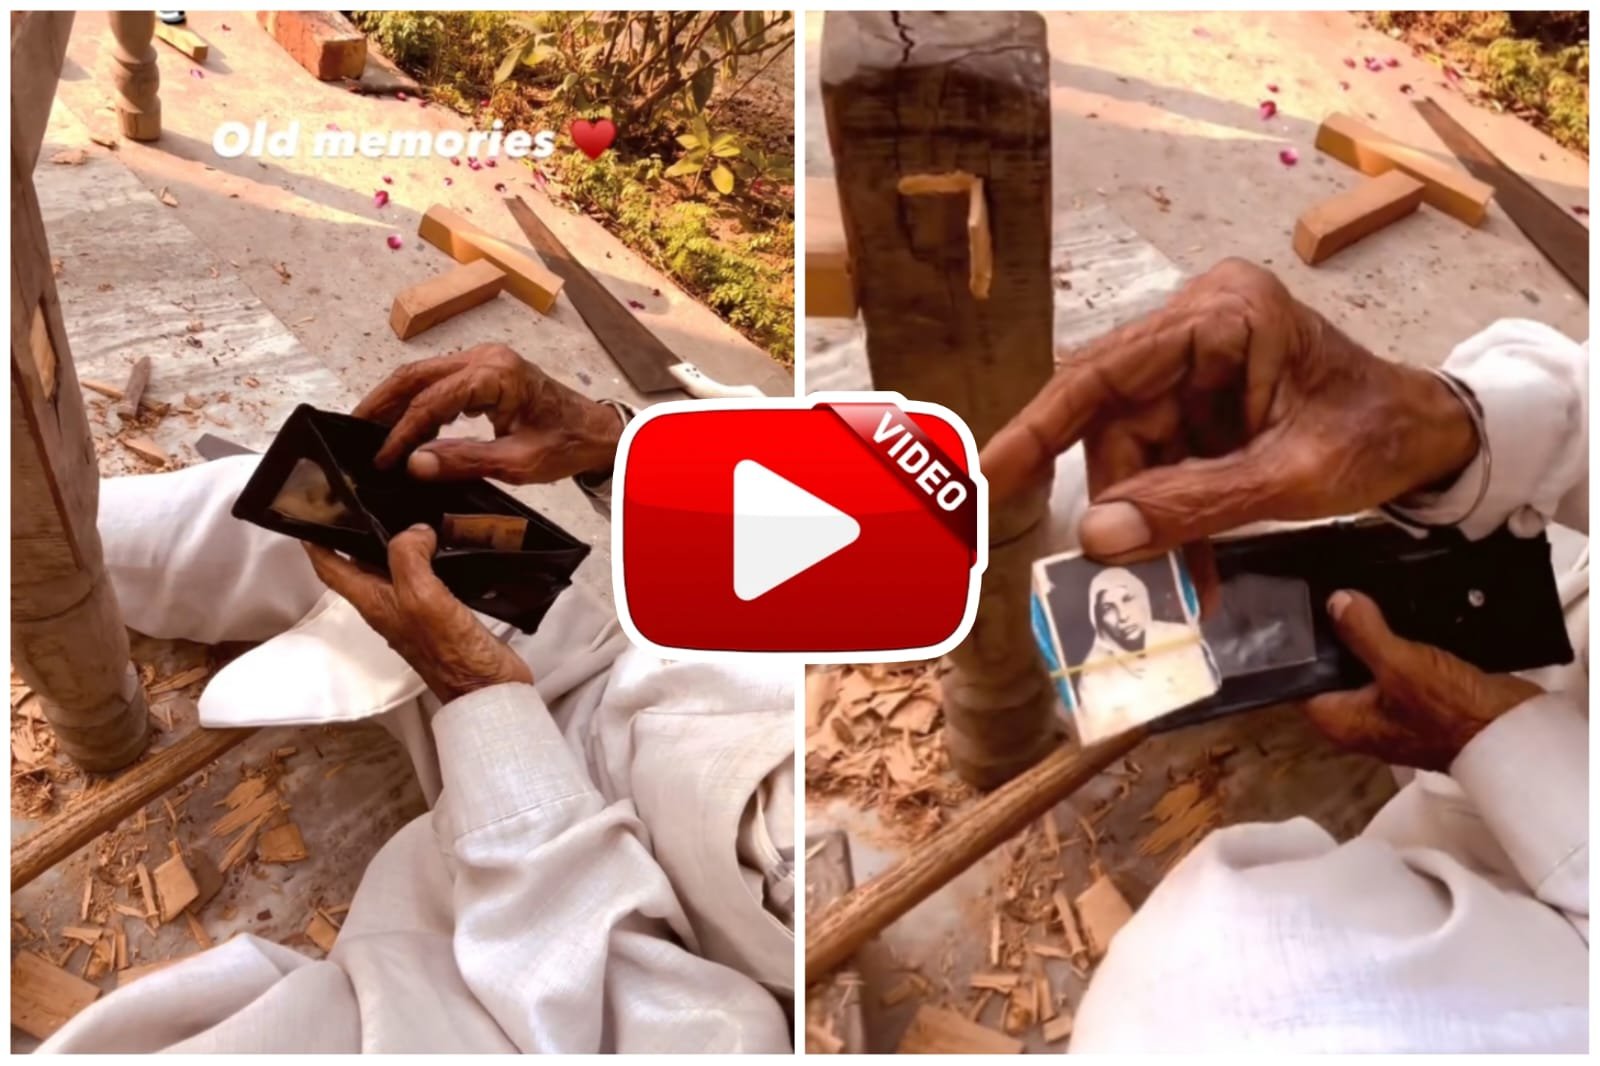 Love Story - This old man's love for his wife will win your heart